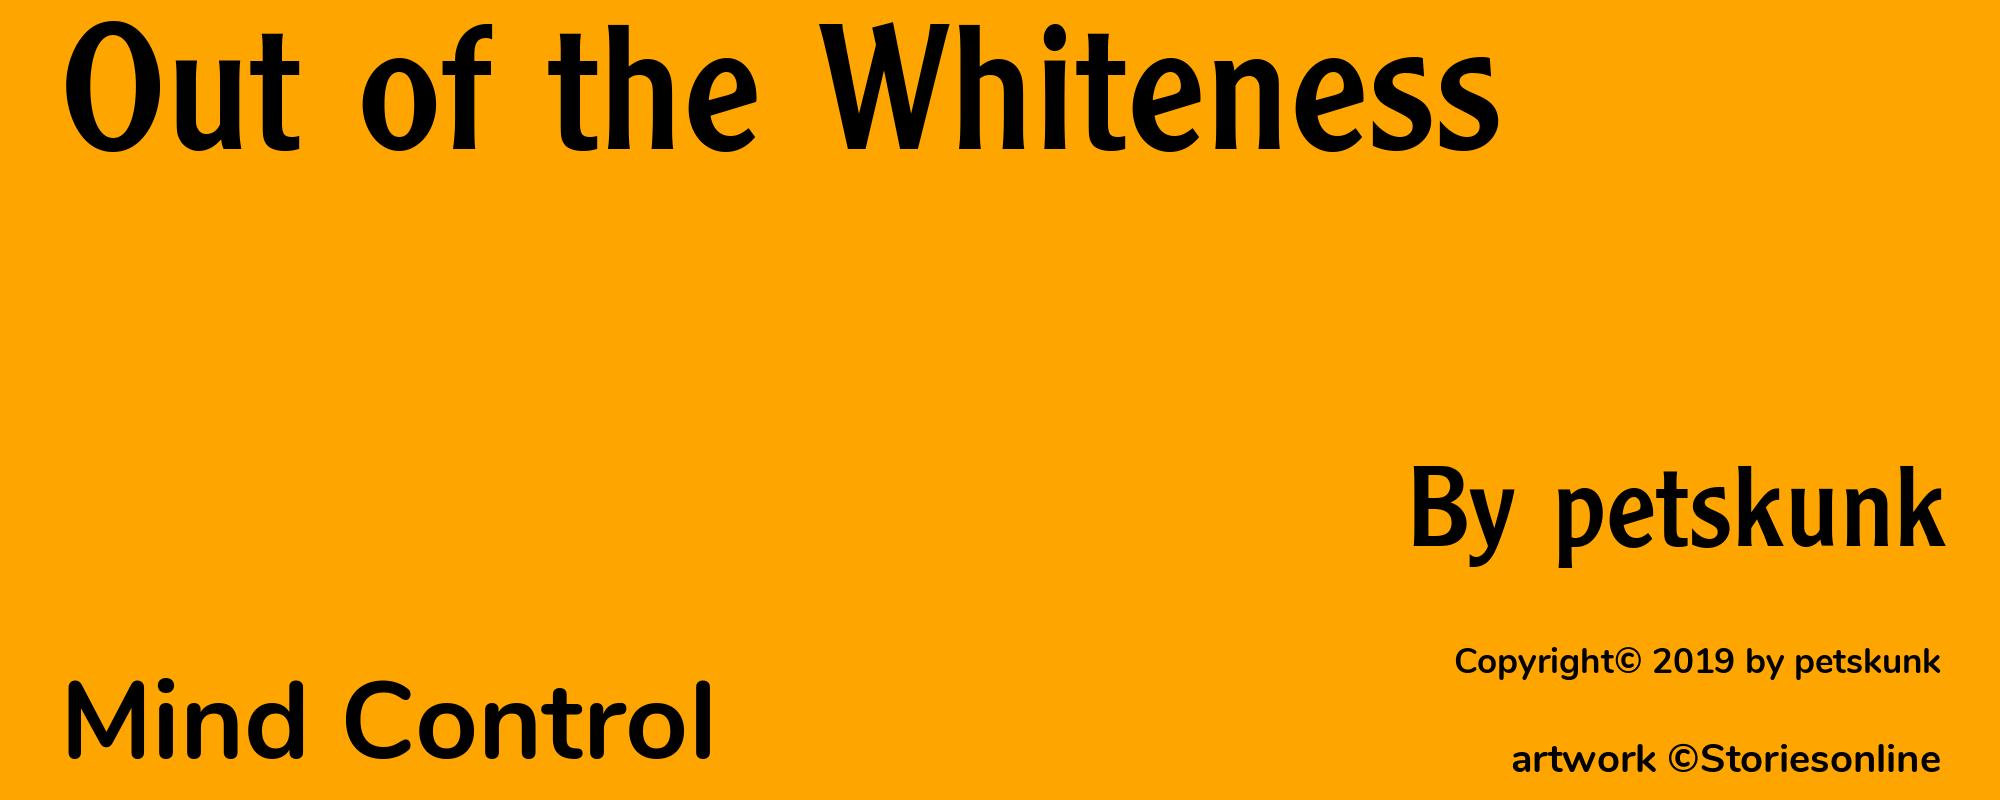 Out of the Whiteness - Cover